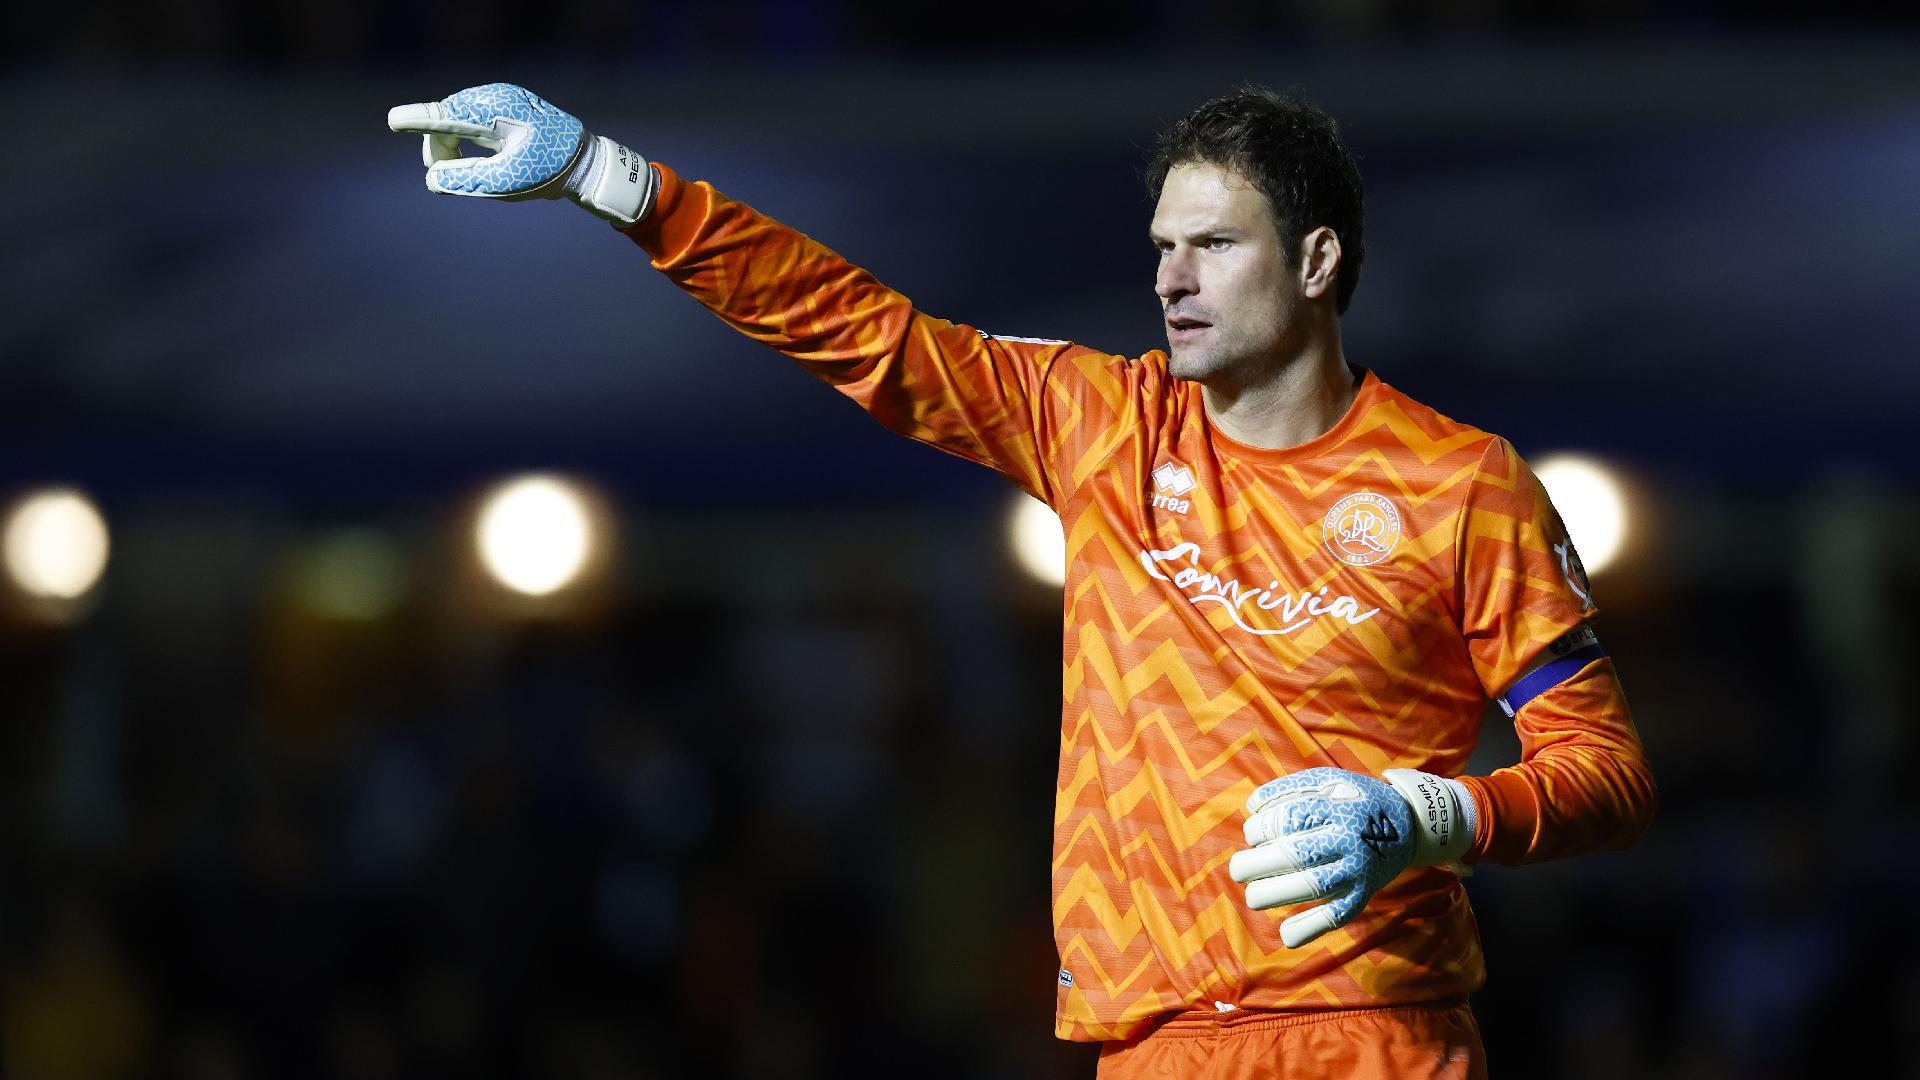 Goalkeepers on top as Birmingham and QPR play out goalless draw